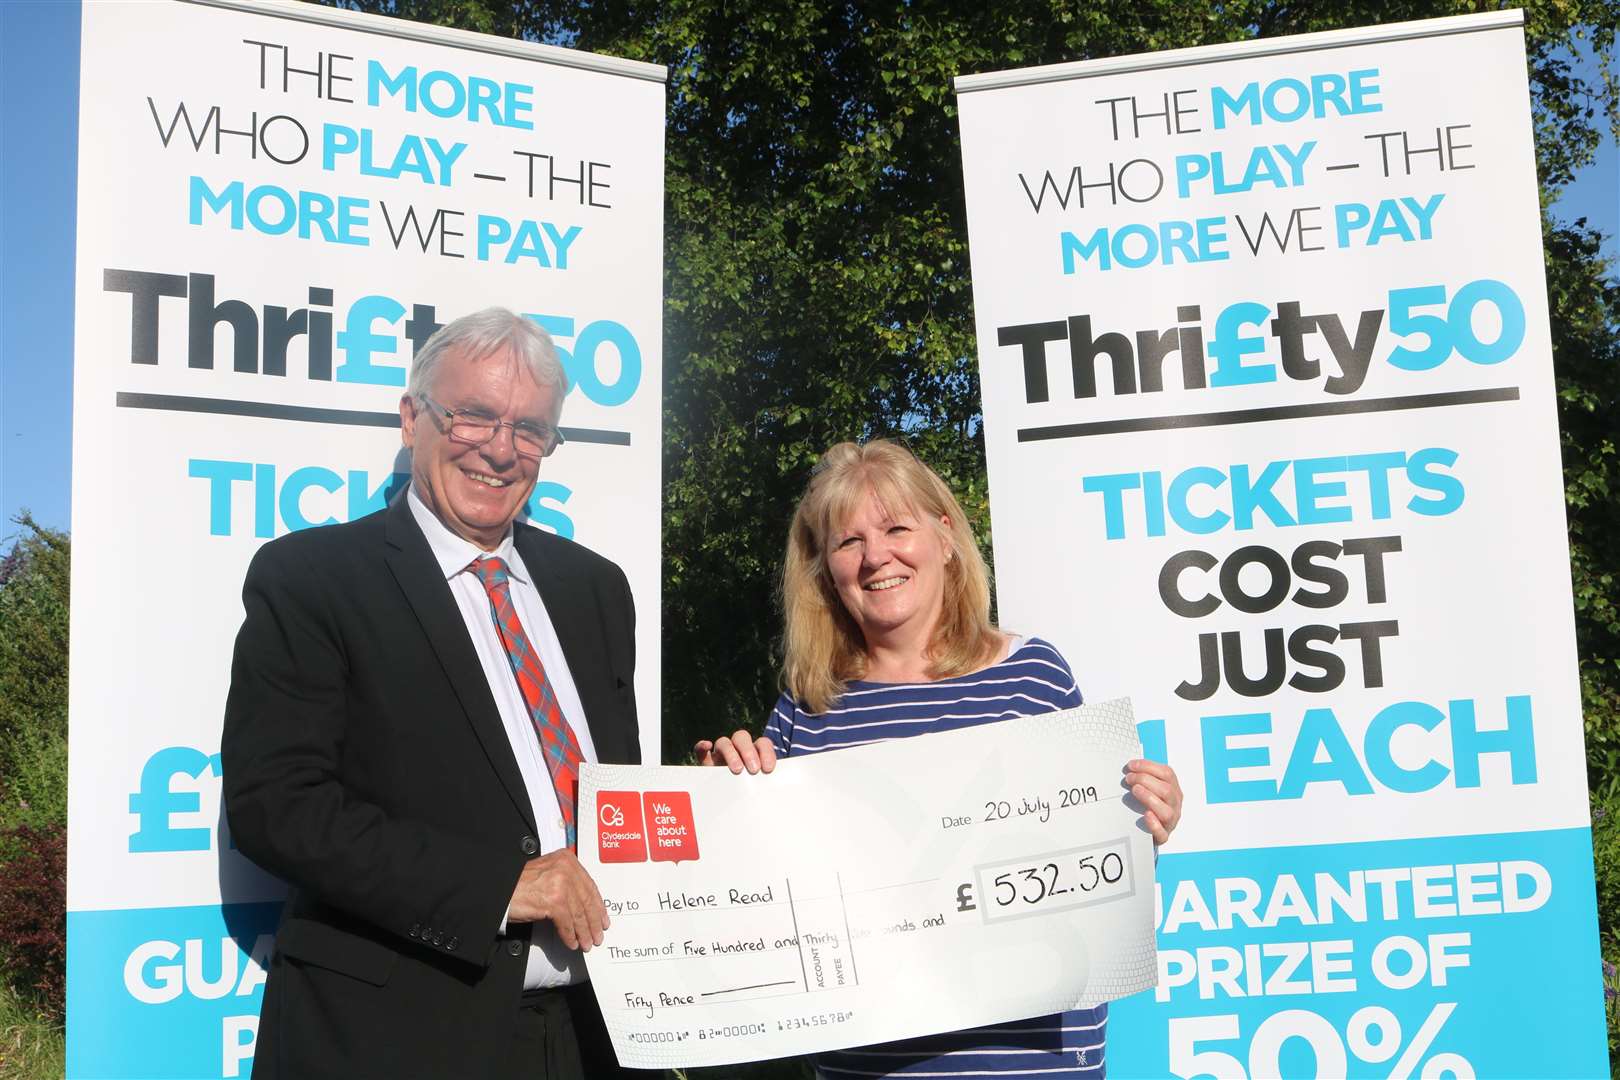 Deputy Provost Graham Ross presents Helene Read of Avoch with the first ever Thrifty50 Prize of £532.50. Helene's winning ticket was 476.